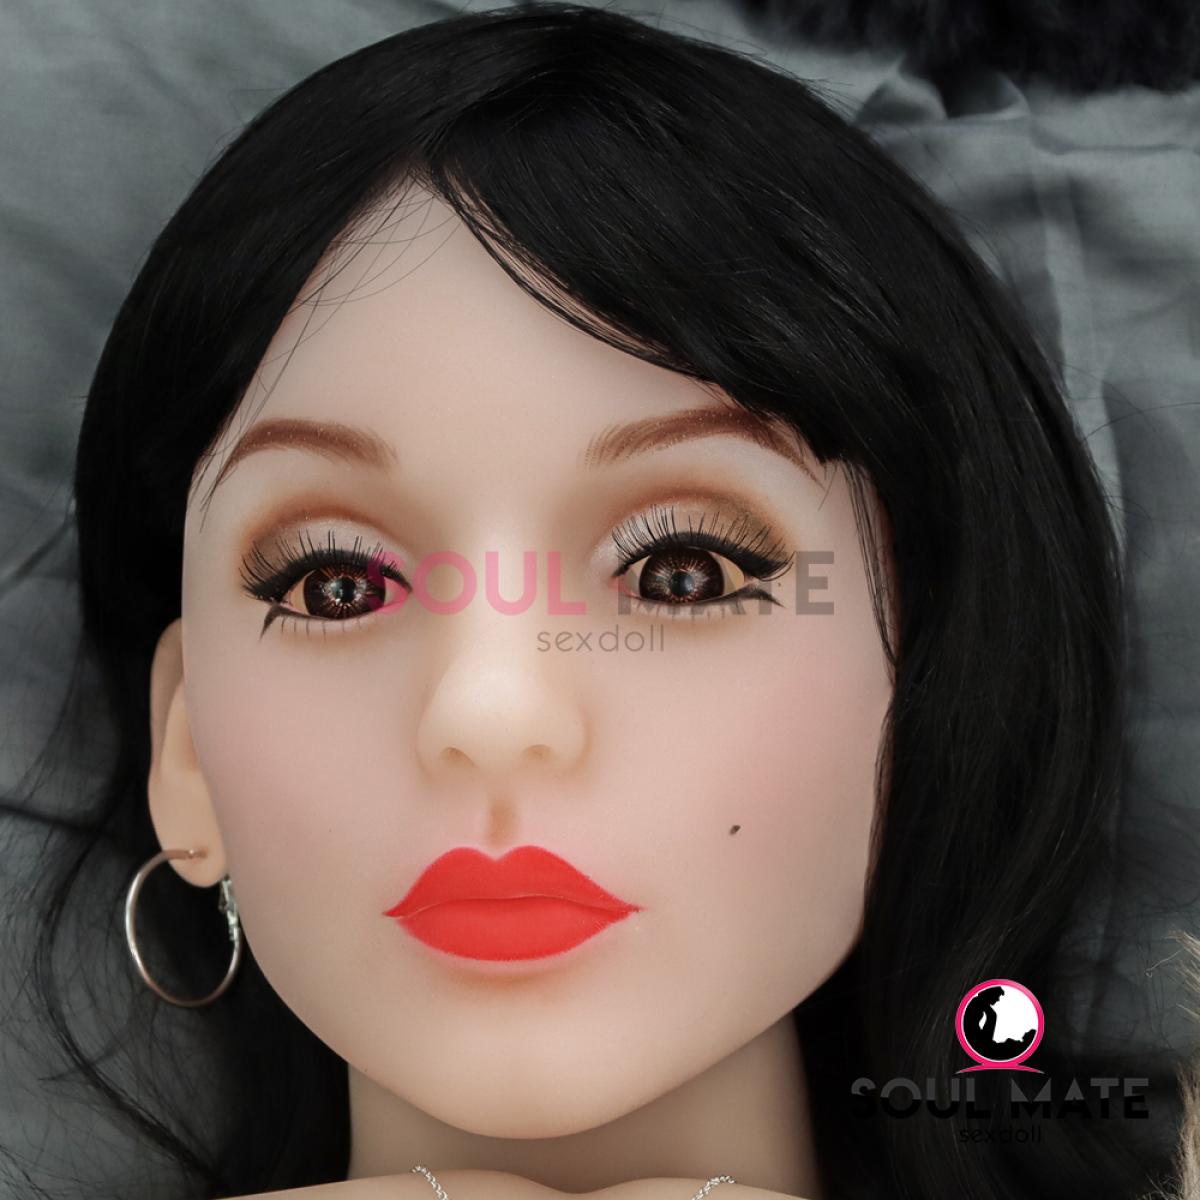 SoulMate Dolls - Kimberly Head - Sex Doll Heads - White